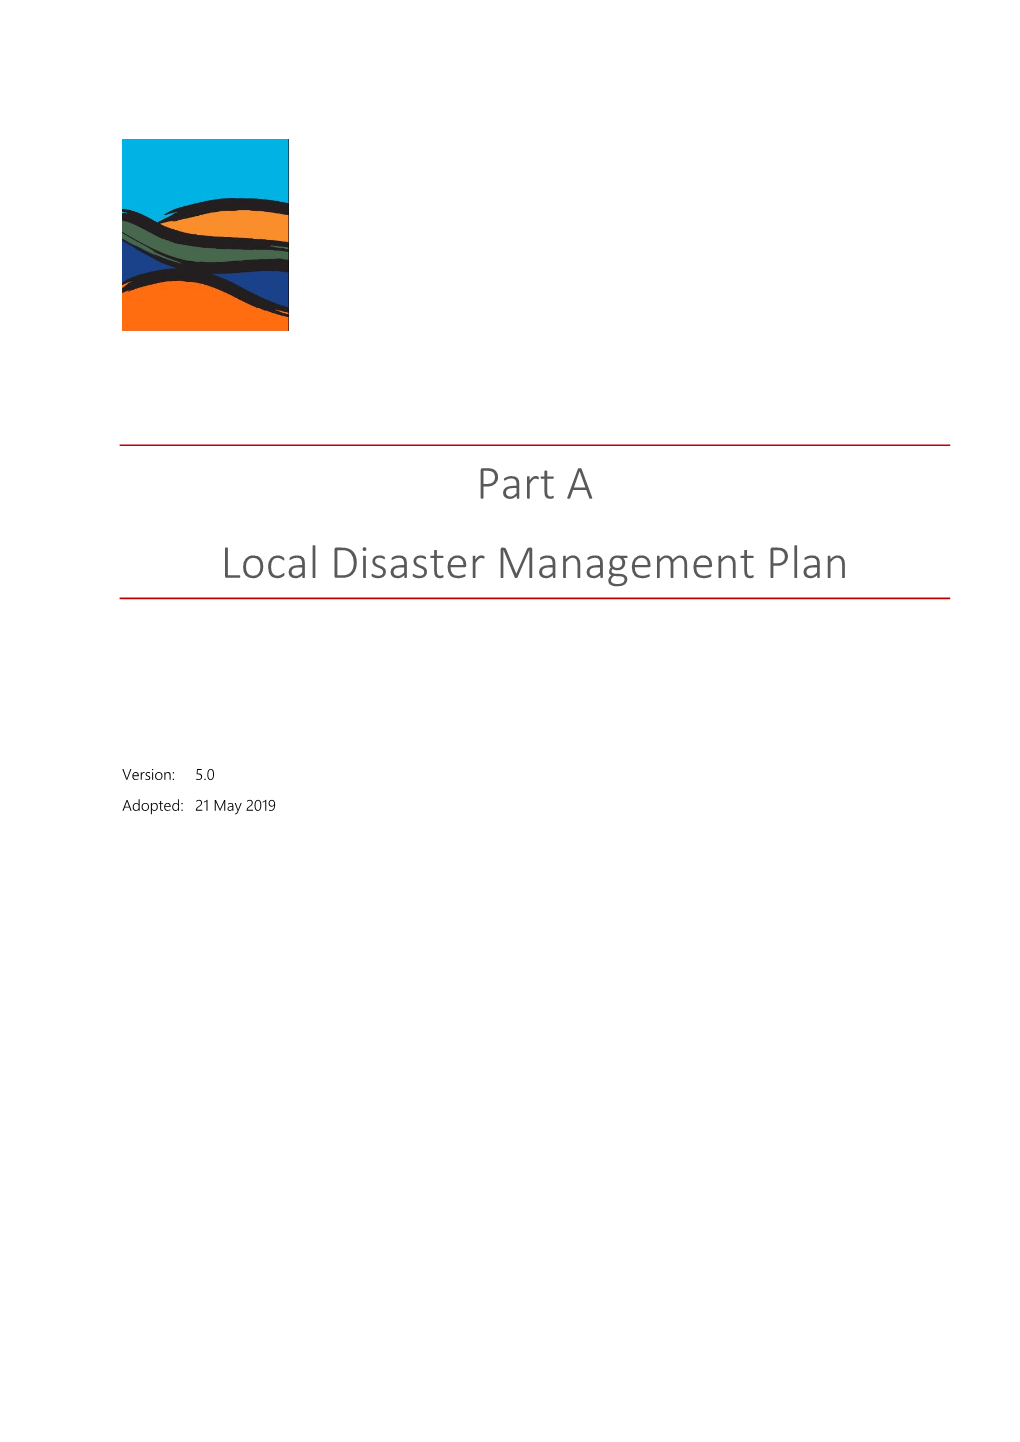 Part a Local Disaster Management Plan